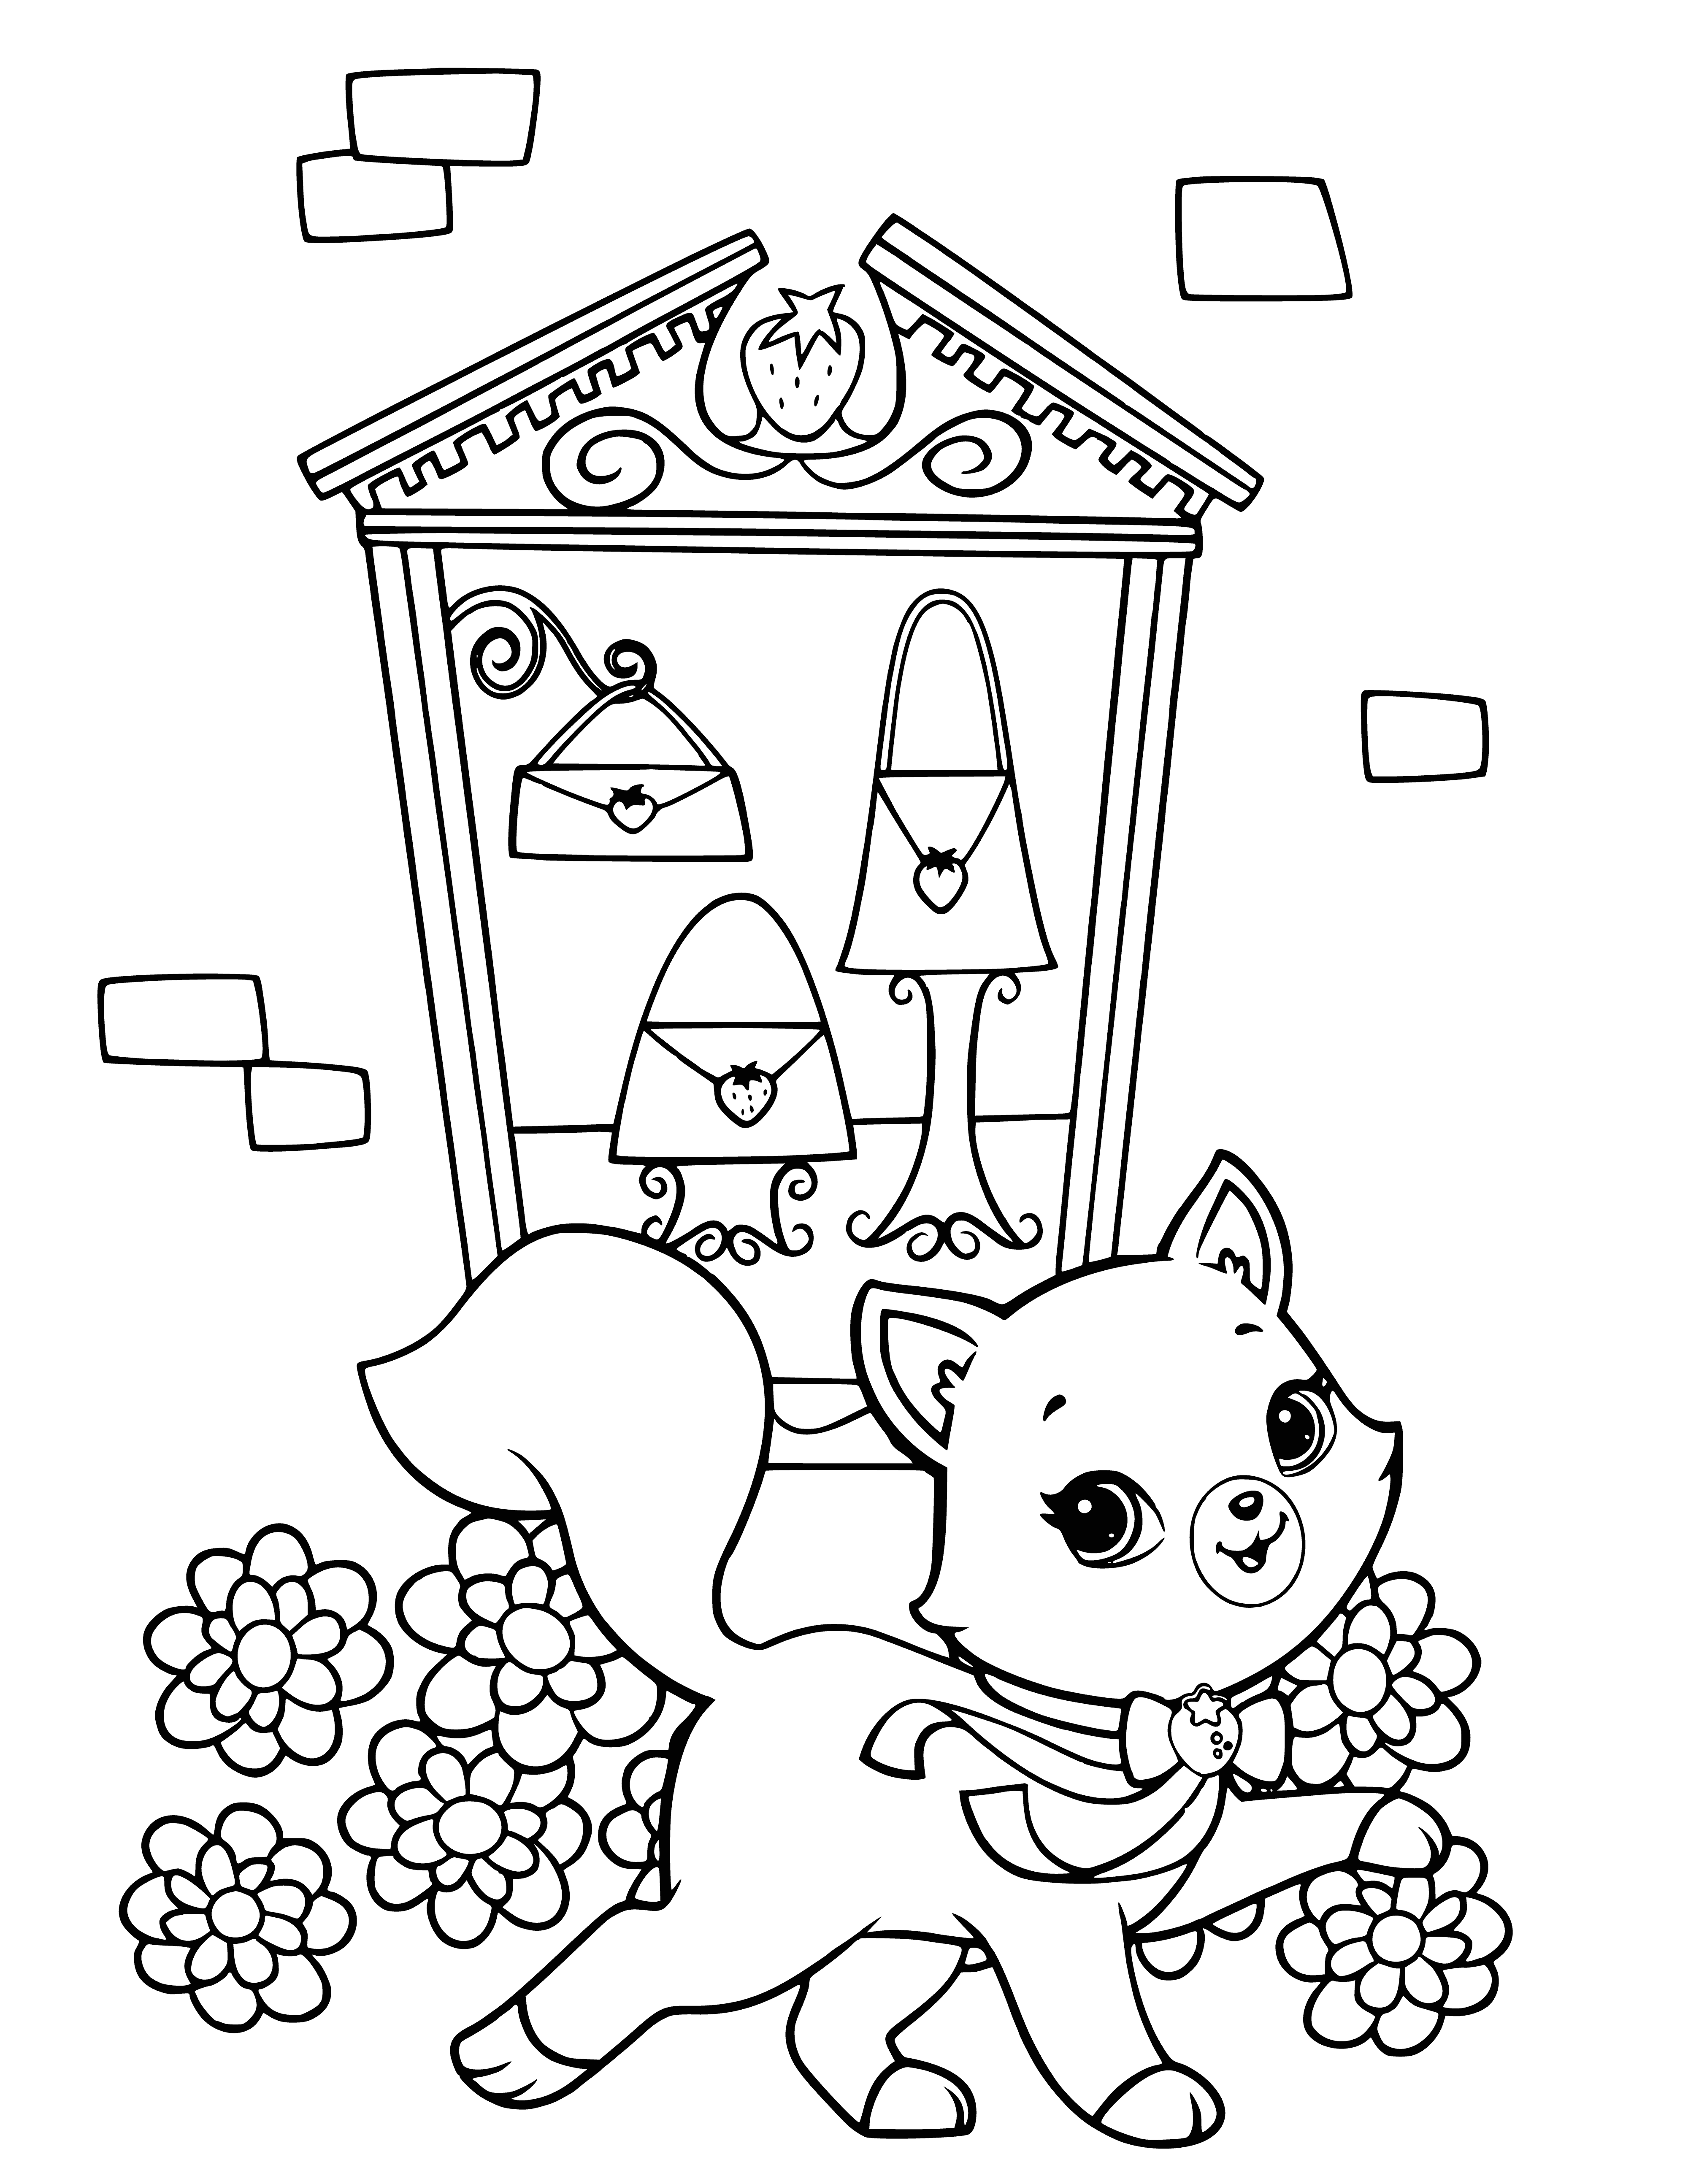 coloring page: Kitten Eclair is a small, brown & white kitty with big ears, blue eyes, & paws in the air while it lies on a pink blanket.